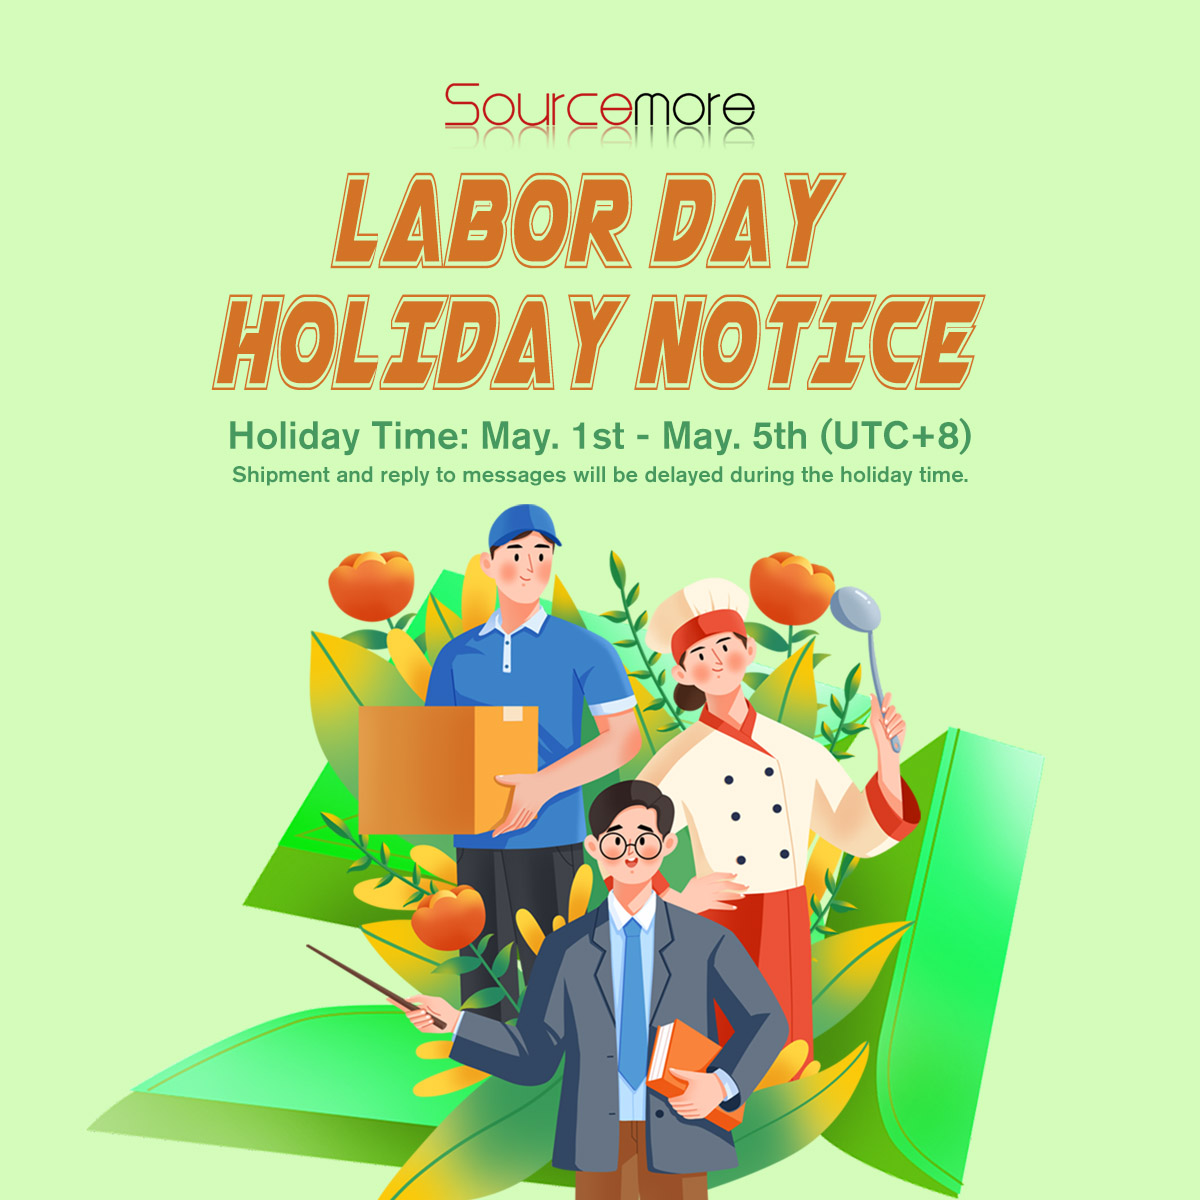 Sourcemore 2024 Labor Day Holiday Notice Holiday Time: ⌛May. 1st - May. 5th (UTC+8)⌛ 📢Shipment and reply to messages will be delay during our holiday time. 🙌Please note that all our team will be on holiday, our CS team will only be able to deal with some urgent issues.